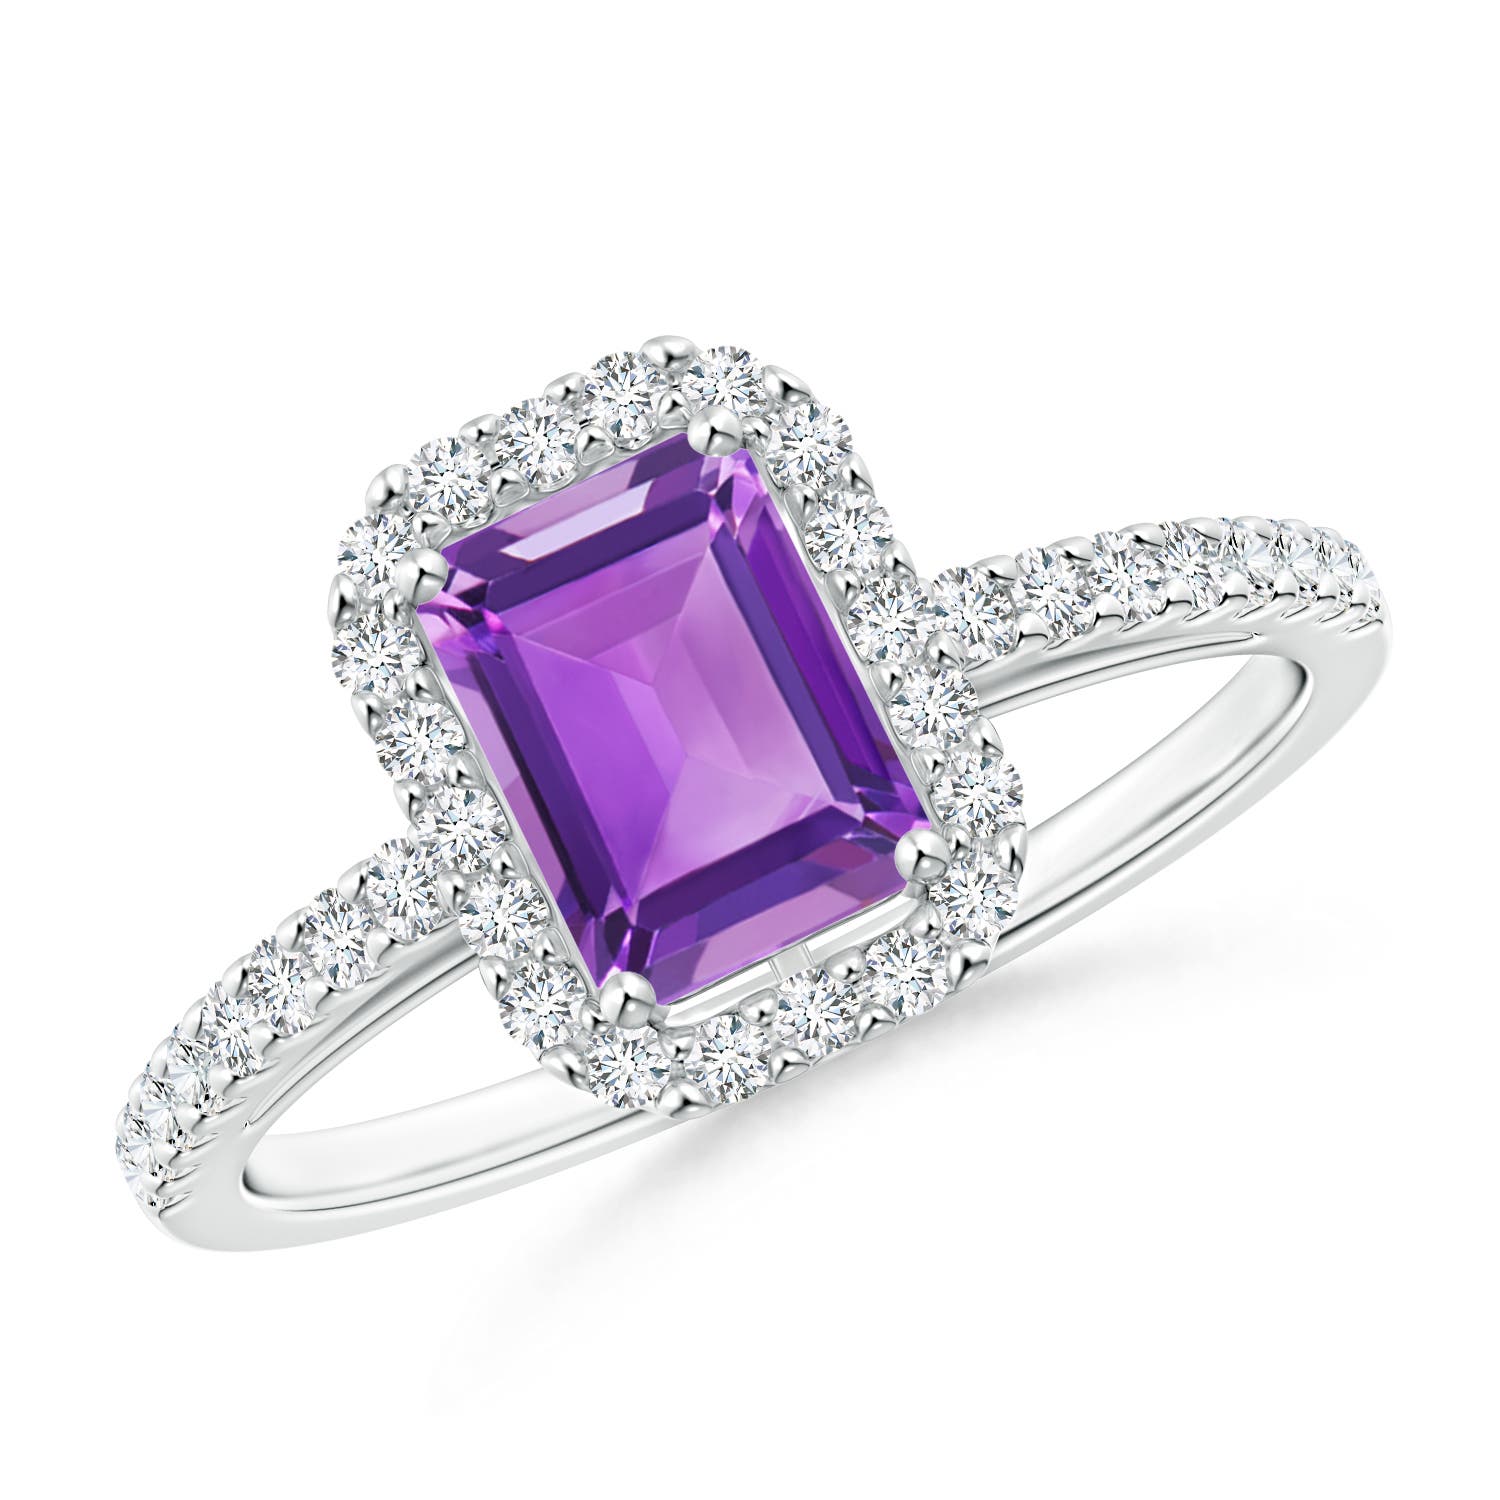 AA - Amethyst / 1.23 CT / 14 KT White Gold